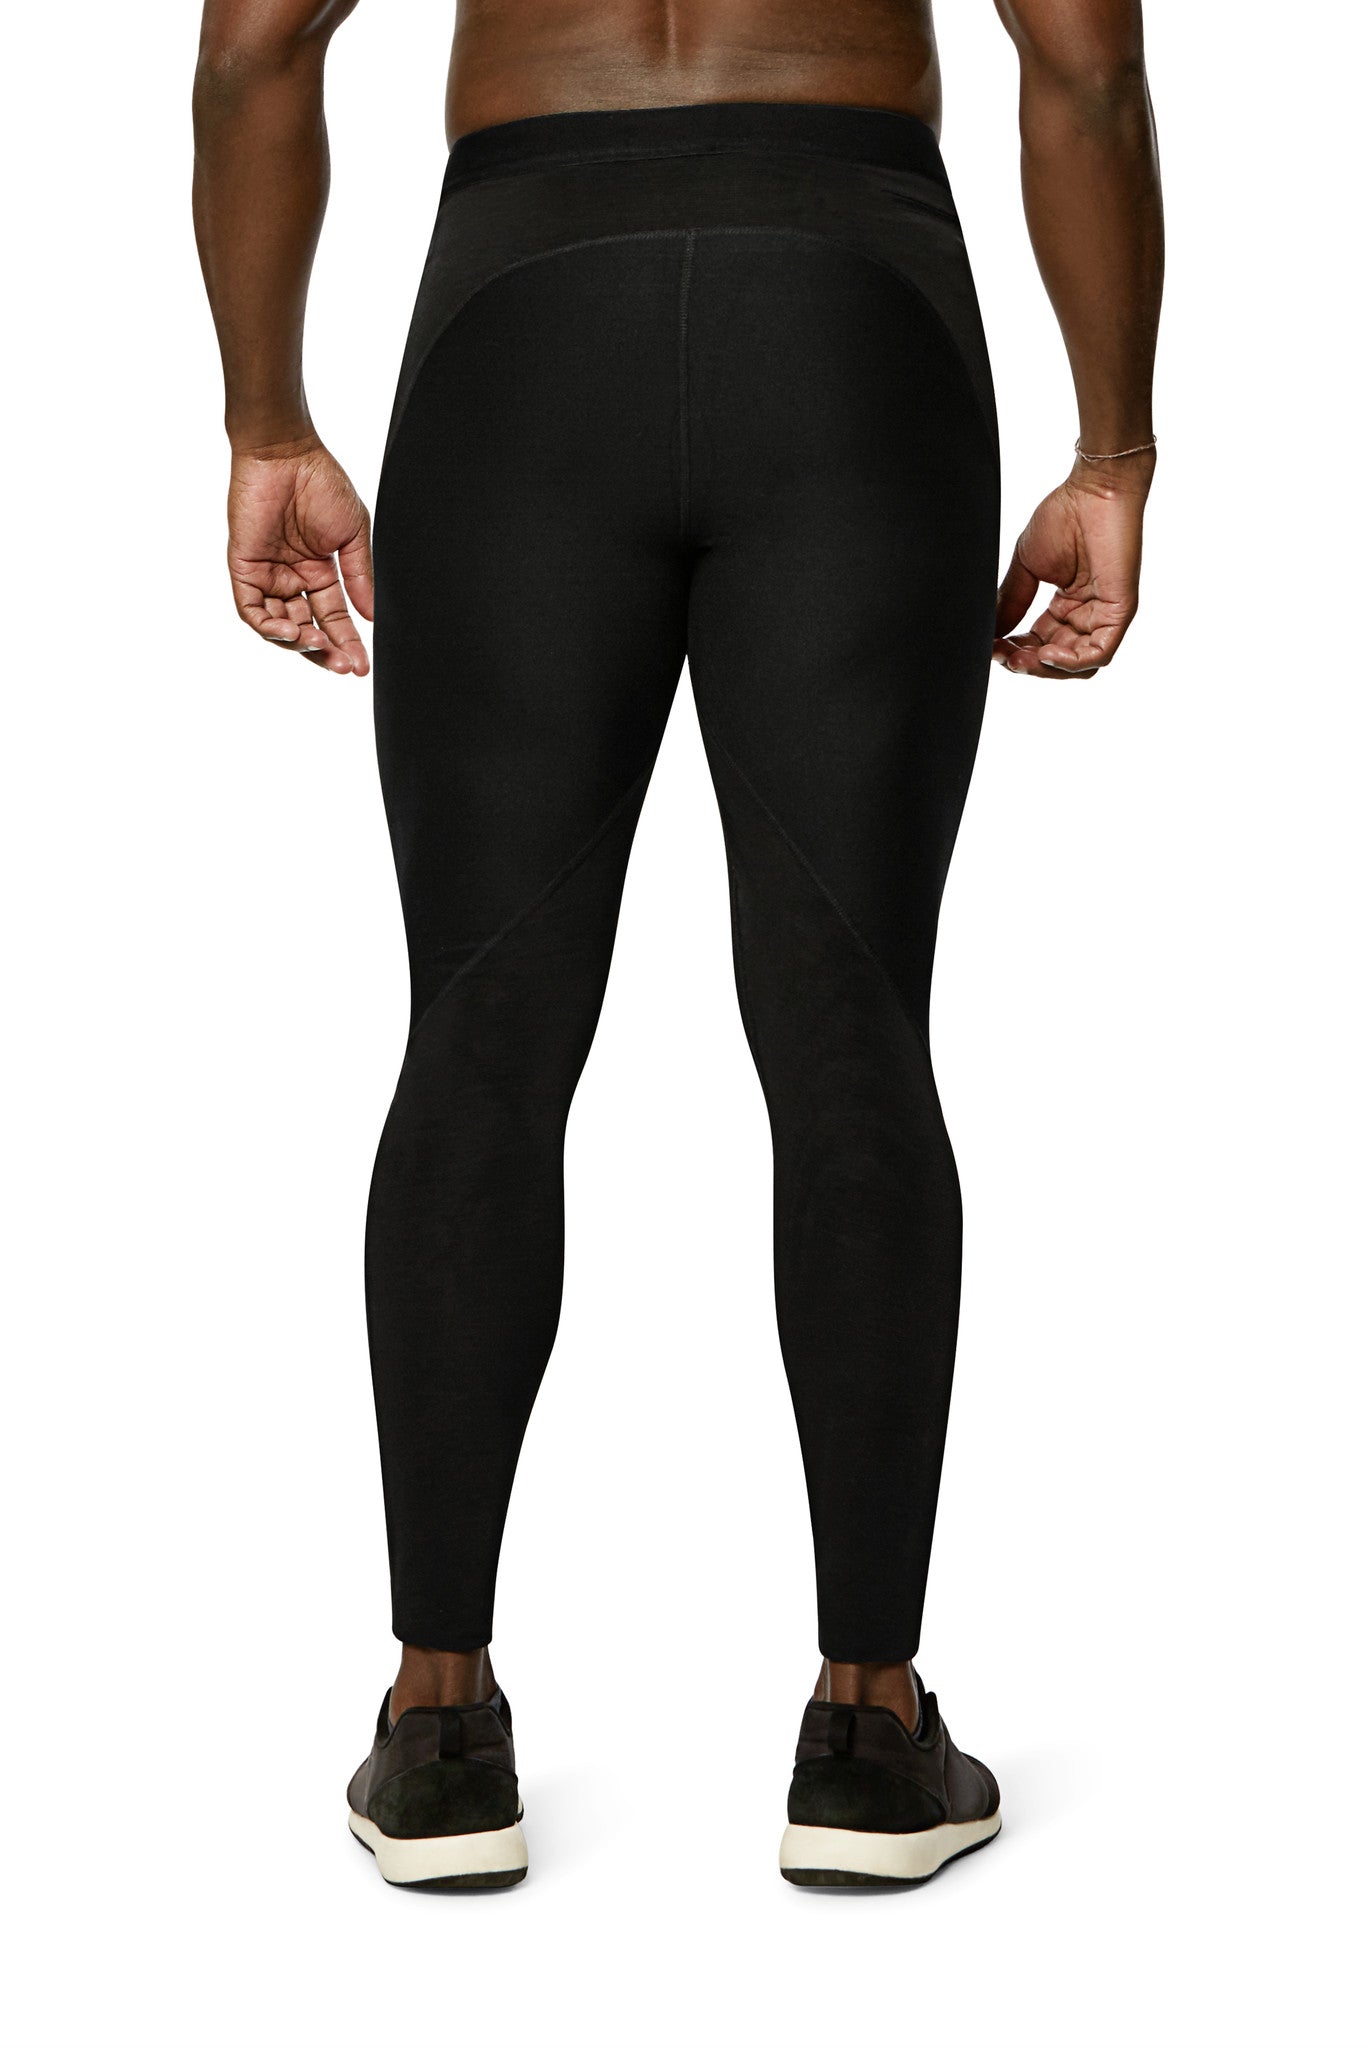 Physiclo Resistance Tights - Believe in the Run